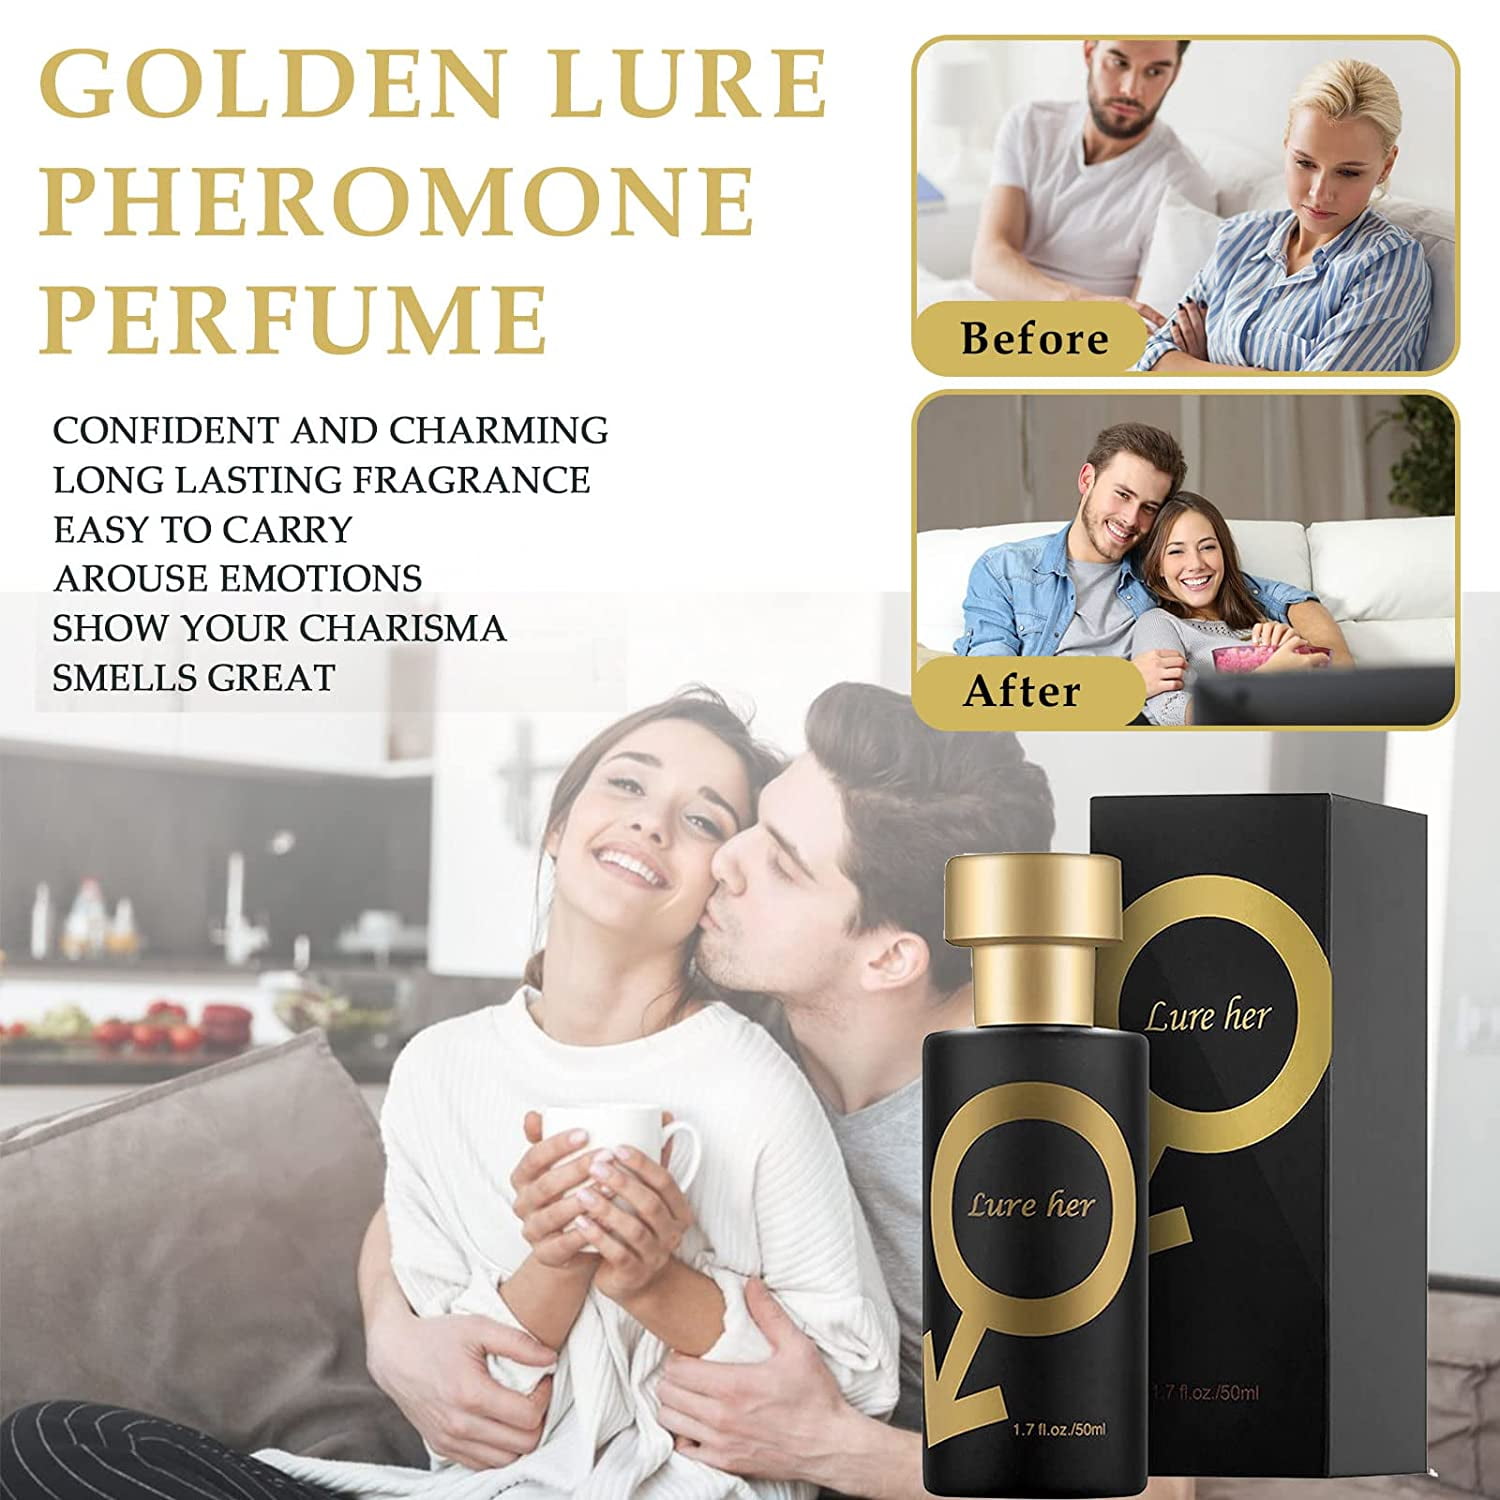 Pheromone Perfume Golden Lure, Luring Her Perfume, Pheromone Perfume to Attract  Men, Pheromone Colony for Men to Attract Women 